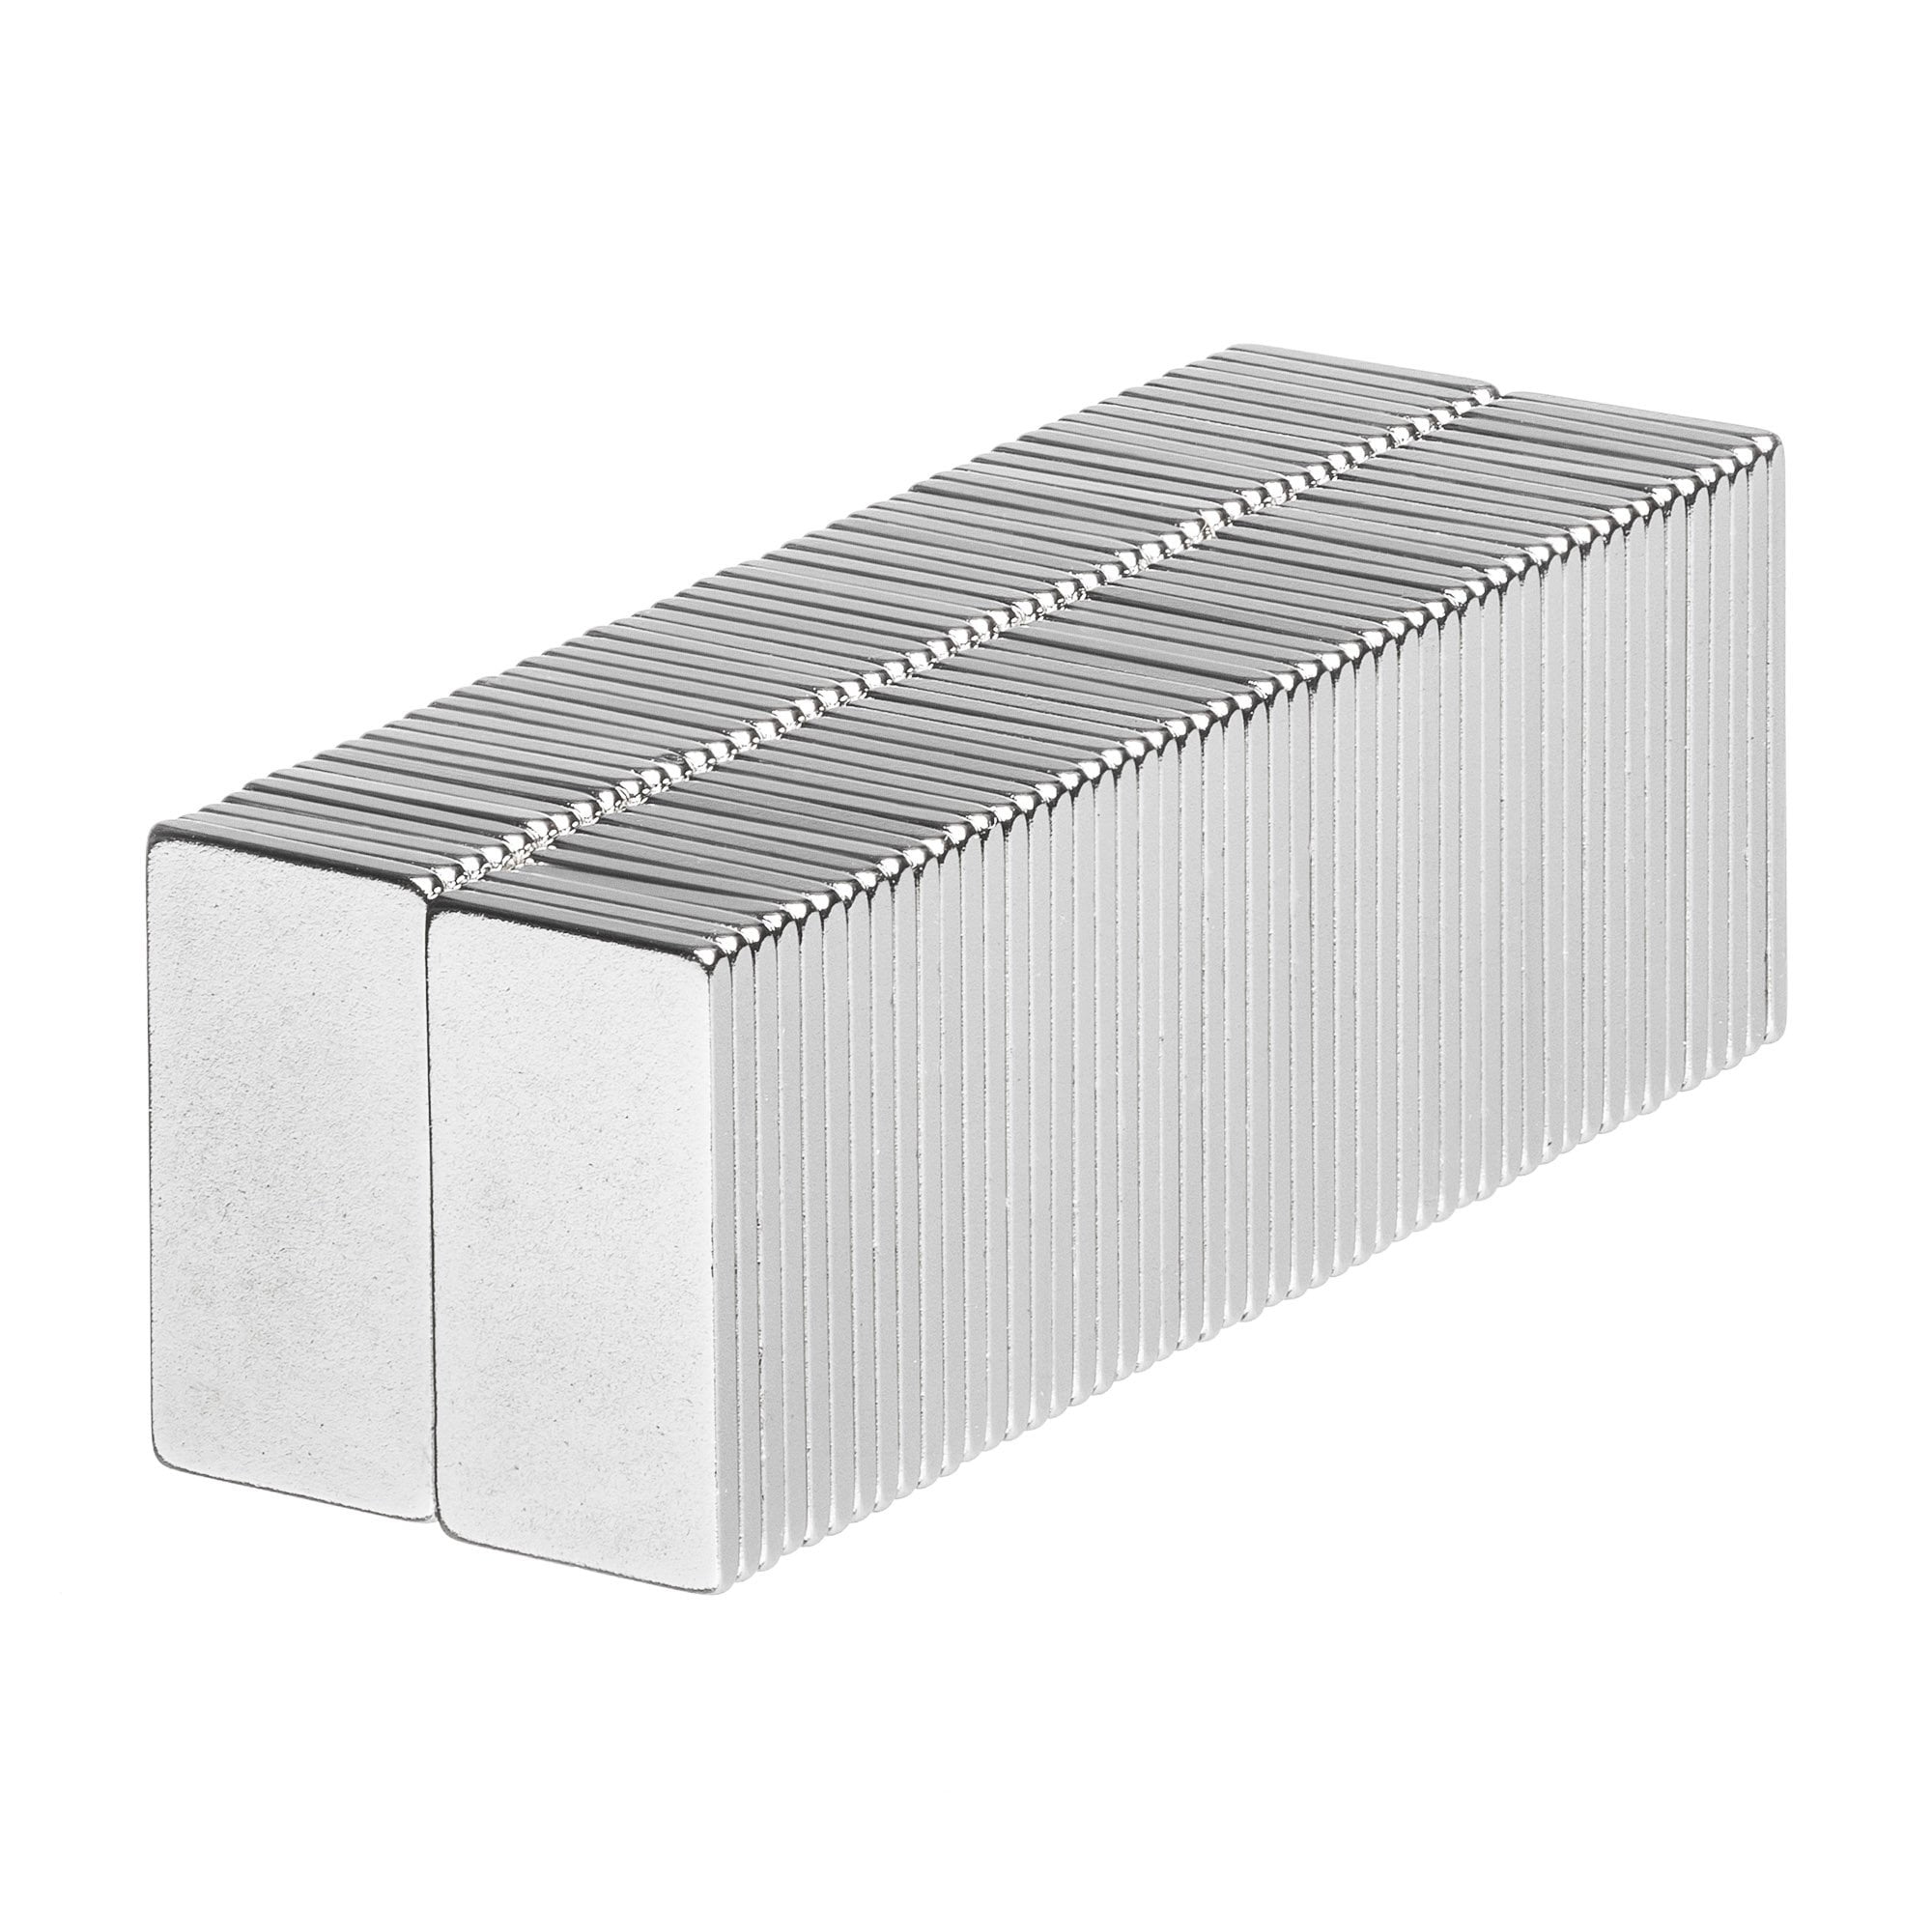 20 Pieces of 1/4x1/4x1/2 Inch Rare Earth Neodymium Block Craft and Hobby Magnet 